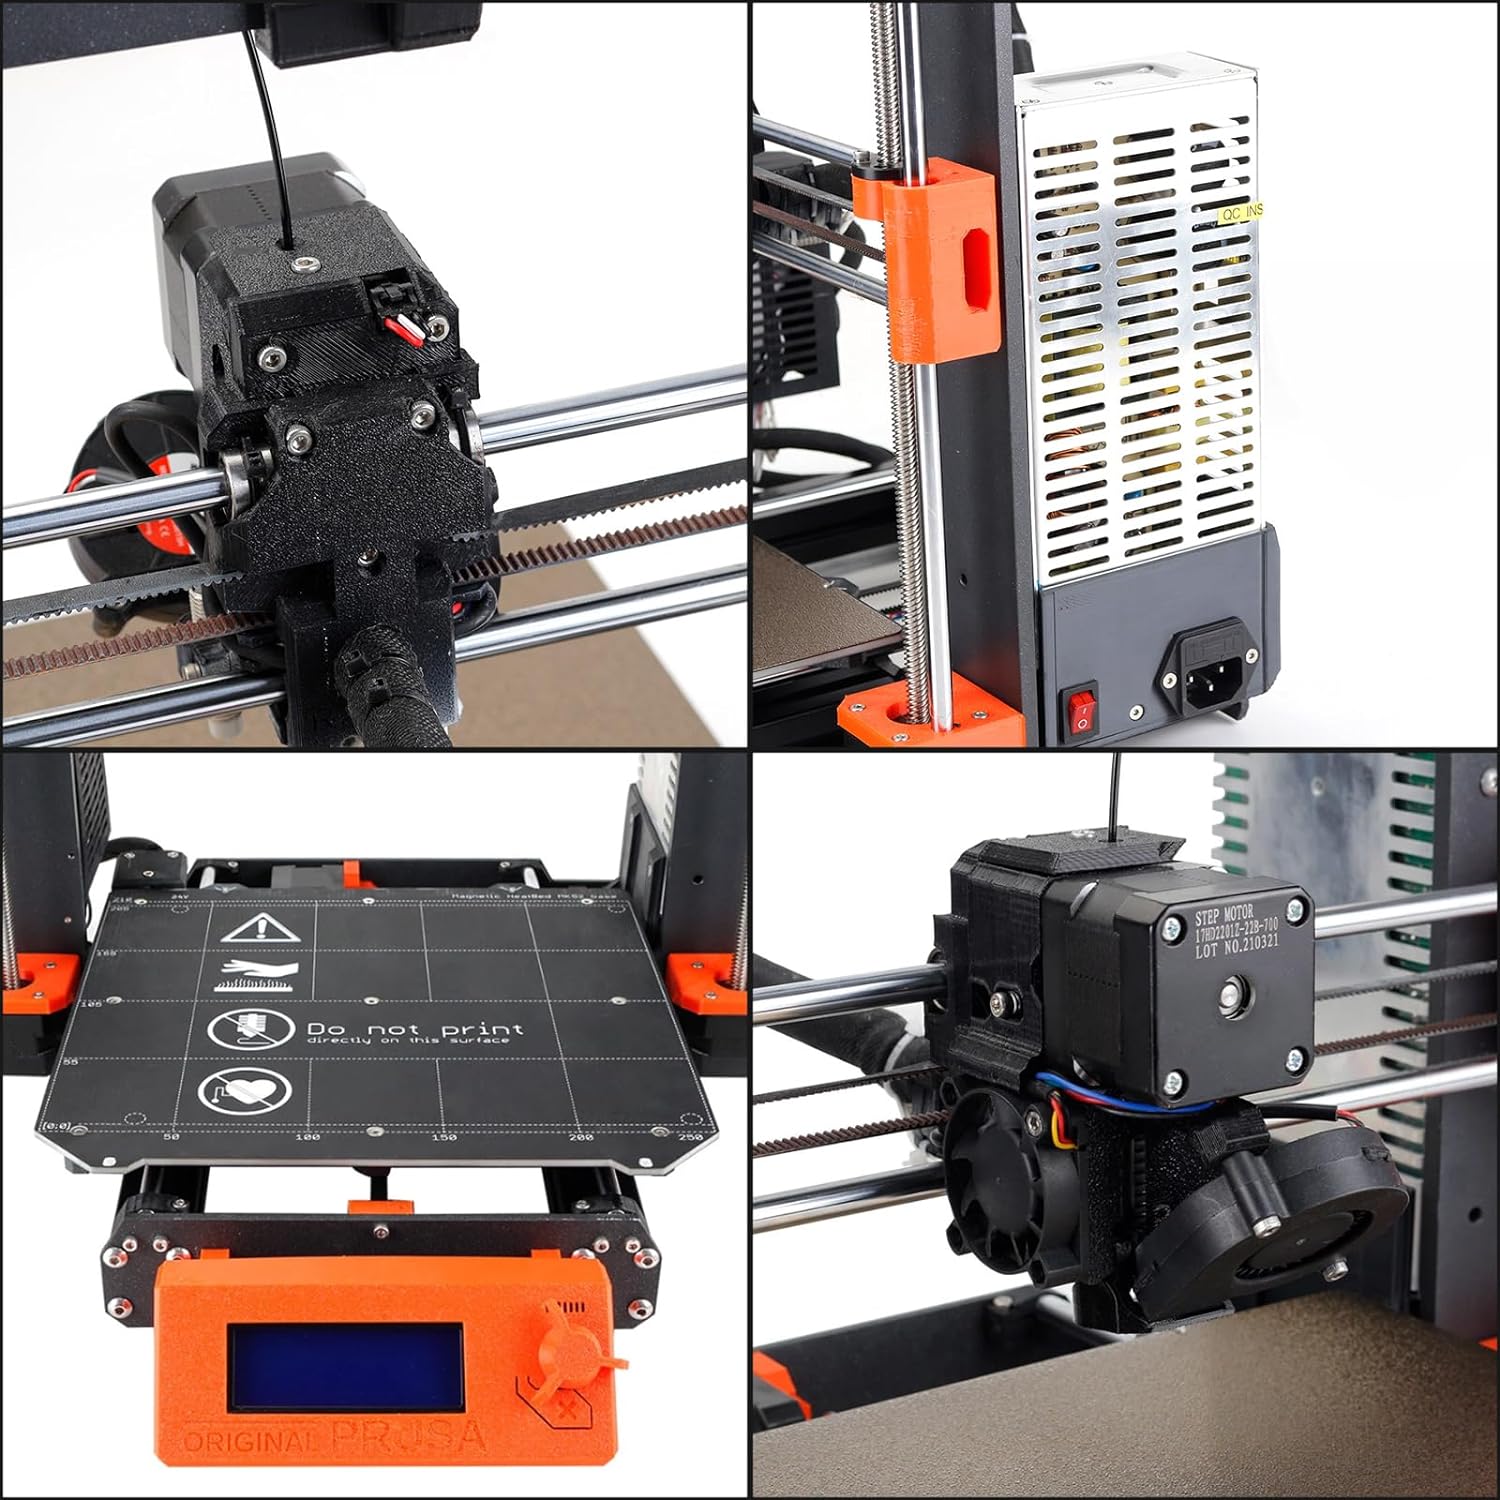 fysetc-prus-i3-mk3s-petg-material-printed-parts-customized-special-3d-printer-kit-for-mk225-mk3-upgrade-to-mk3s-plus-1 FYSETC Prus i3 MK3S+ PETG Material Printed Parts Review